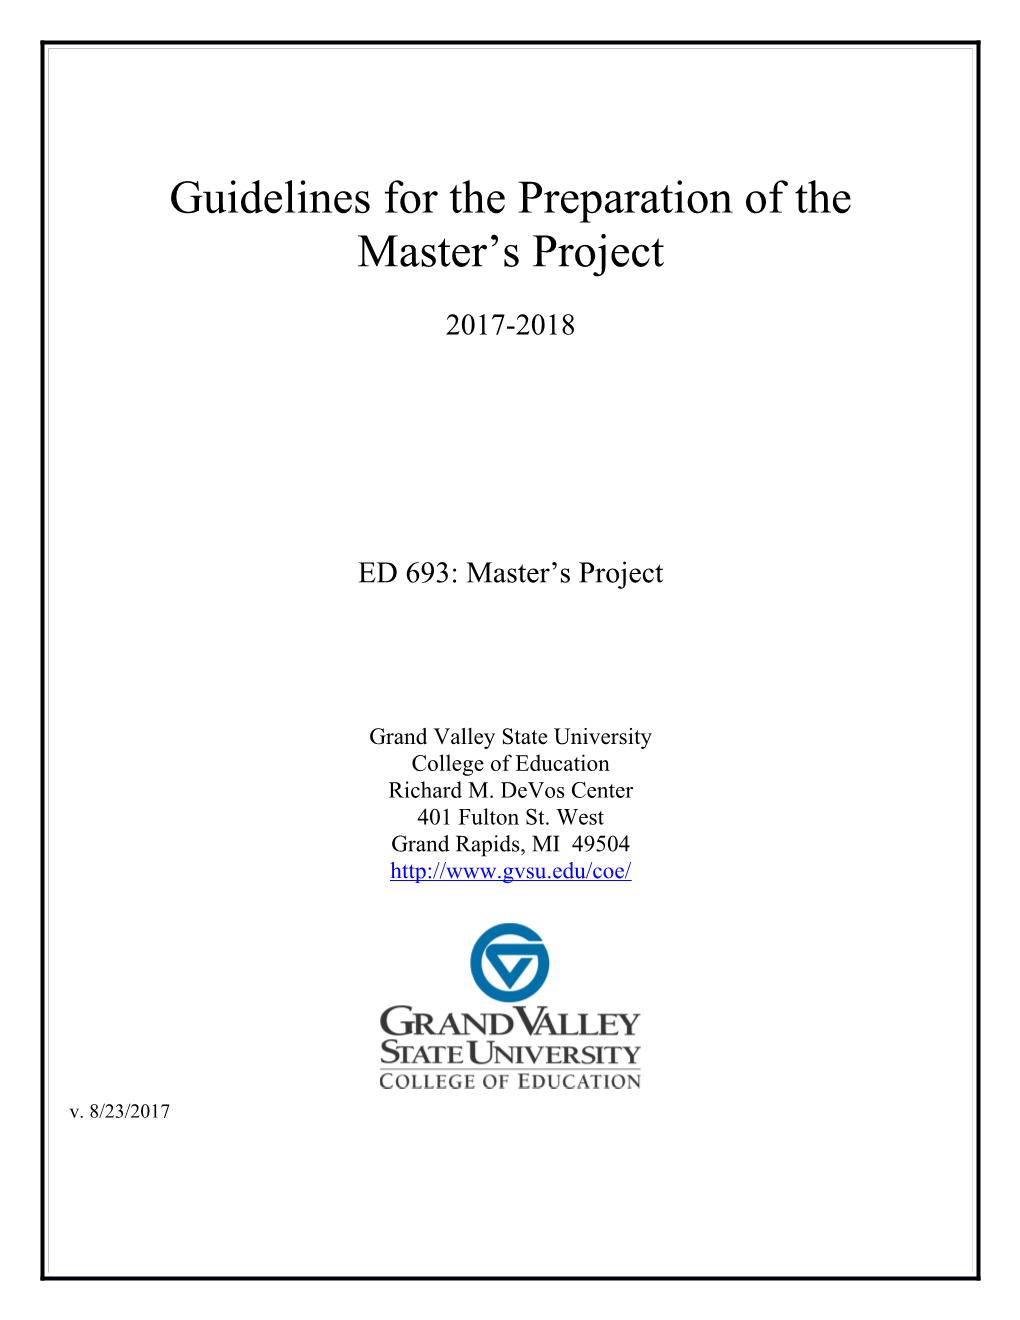 Guidelines for the Preparation of the Master's Project